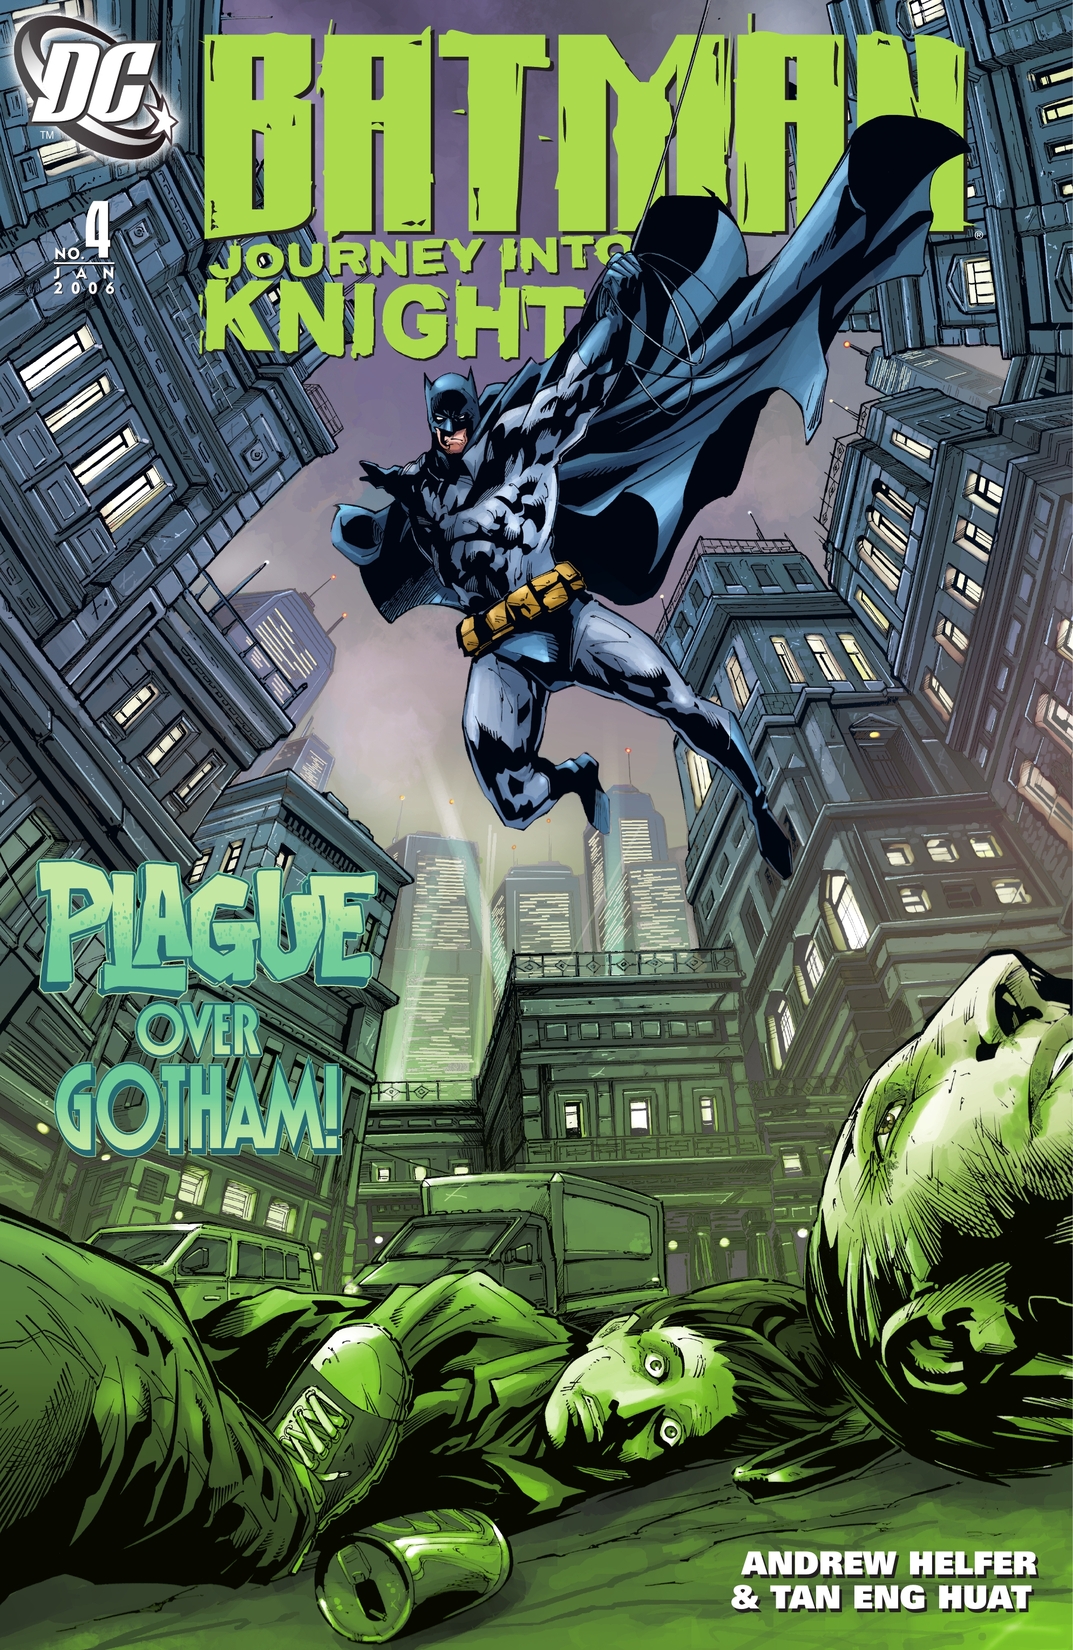 Batman: Journey into Knight #4 preview images